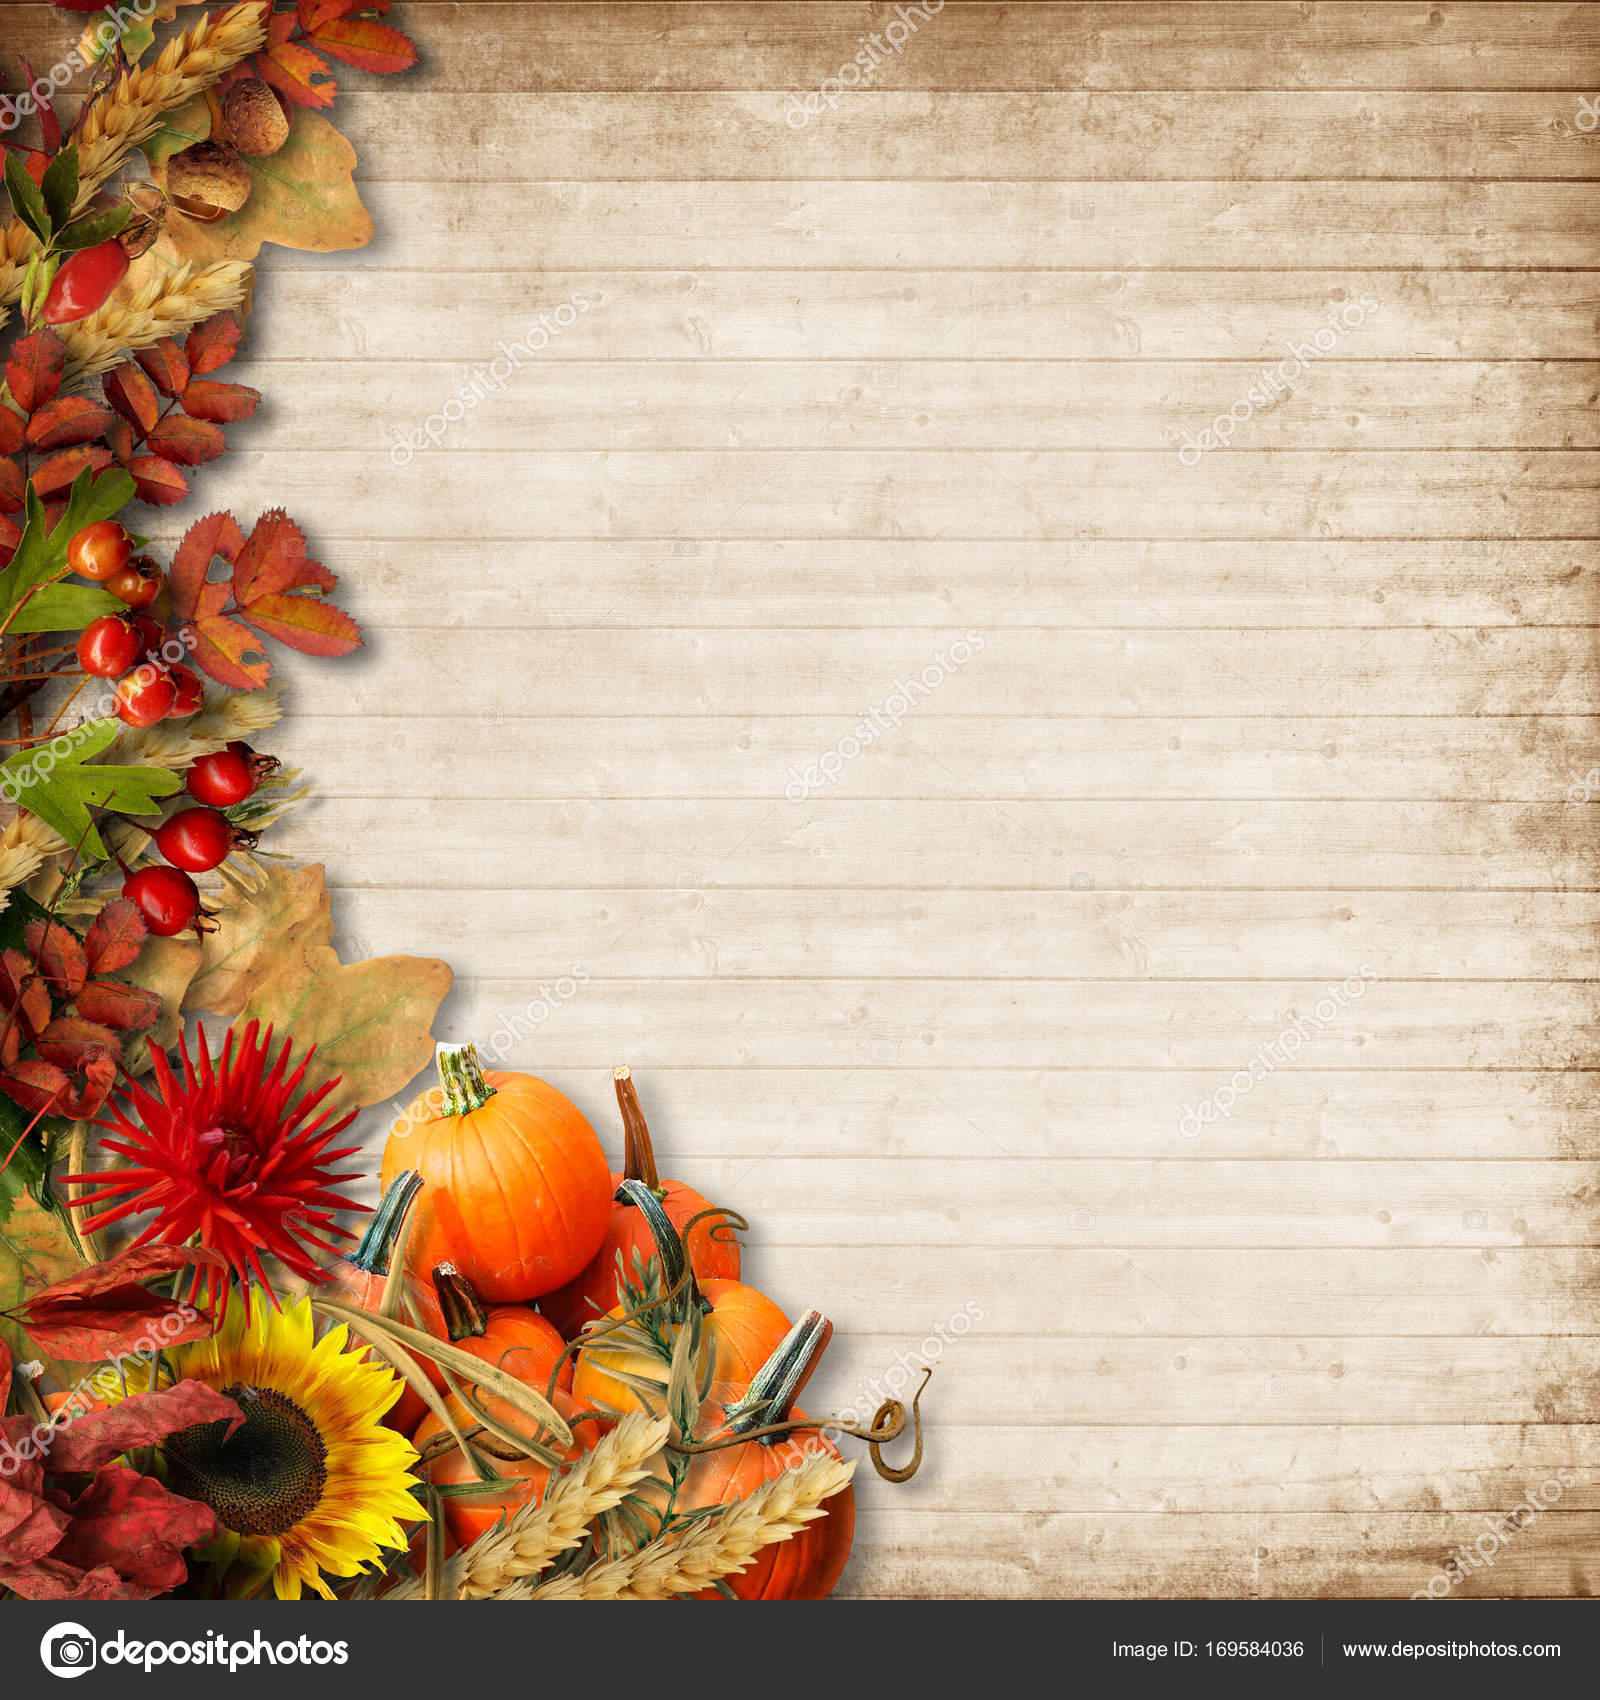 DORCEV 10x8ft Happy Thanksgiving Day Photography Backdrop Retro Wooden Table Chalkboard Background Pumpkin Flower Maple Leave Autumn Thanksgiving Party Photo Studio Props